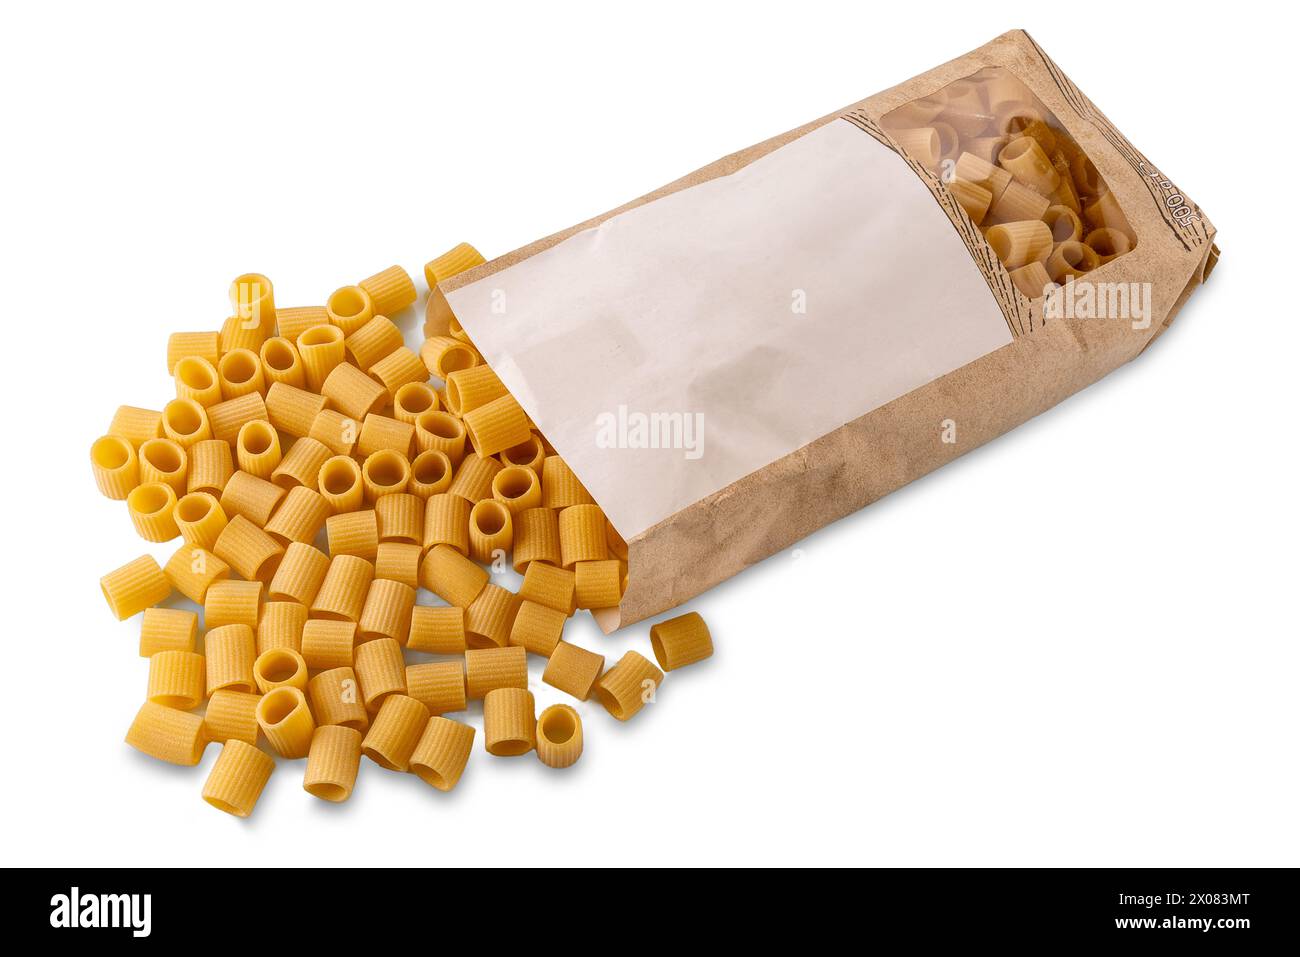 Macheroni mezze maniche pasta bronze-drawn Italian wheat pasta coming out of paper bag isolated on white with clipping path included Stock Photo